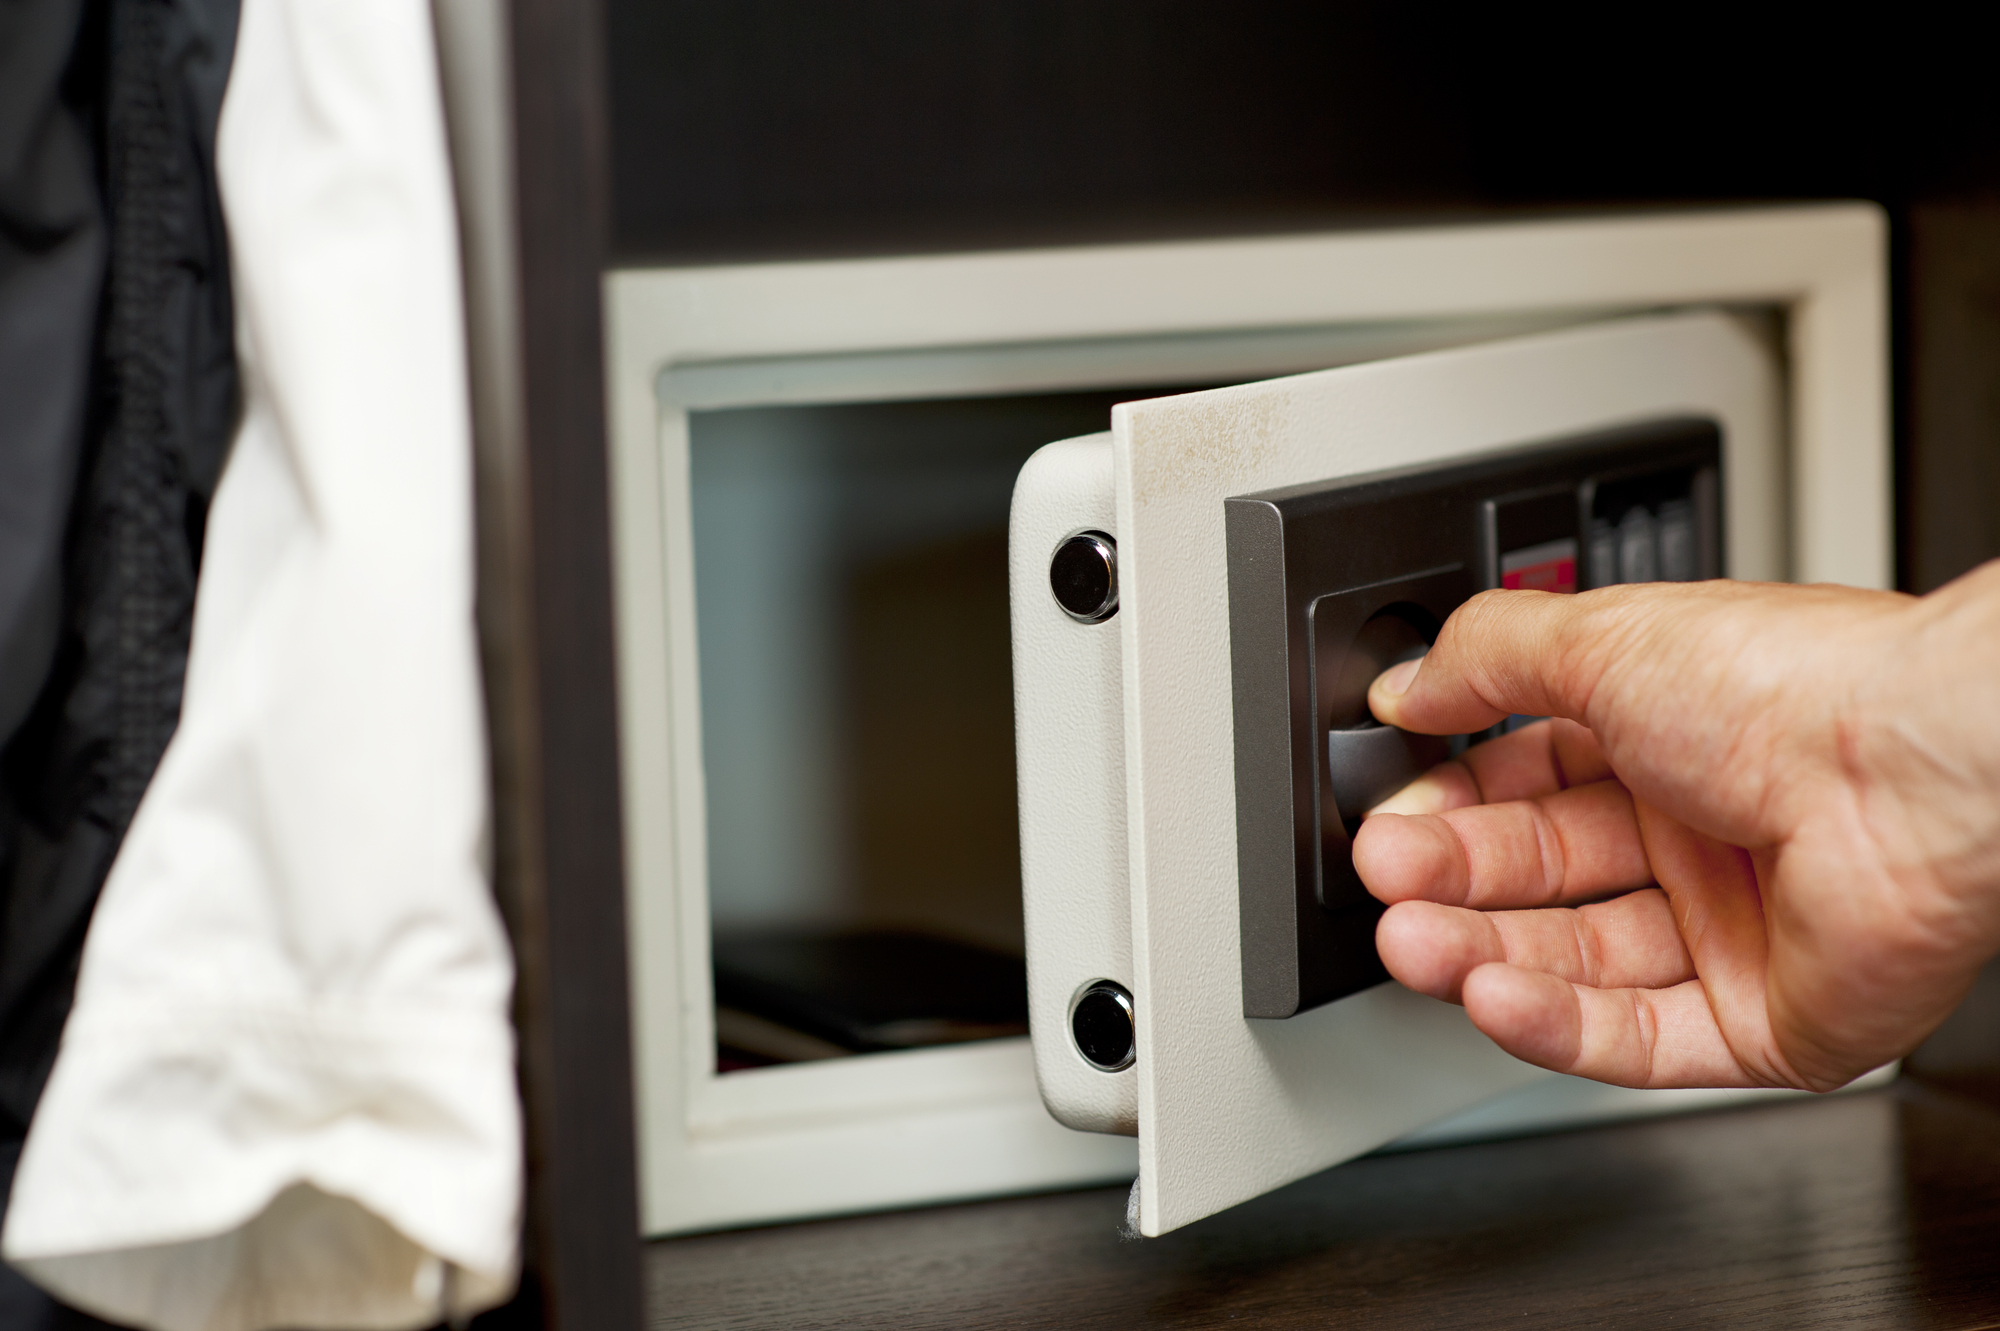 Choosing Great Safes for your Hotel